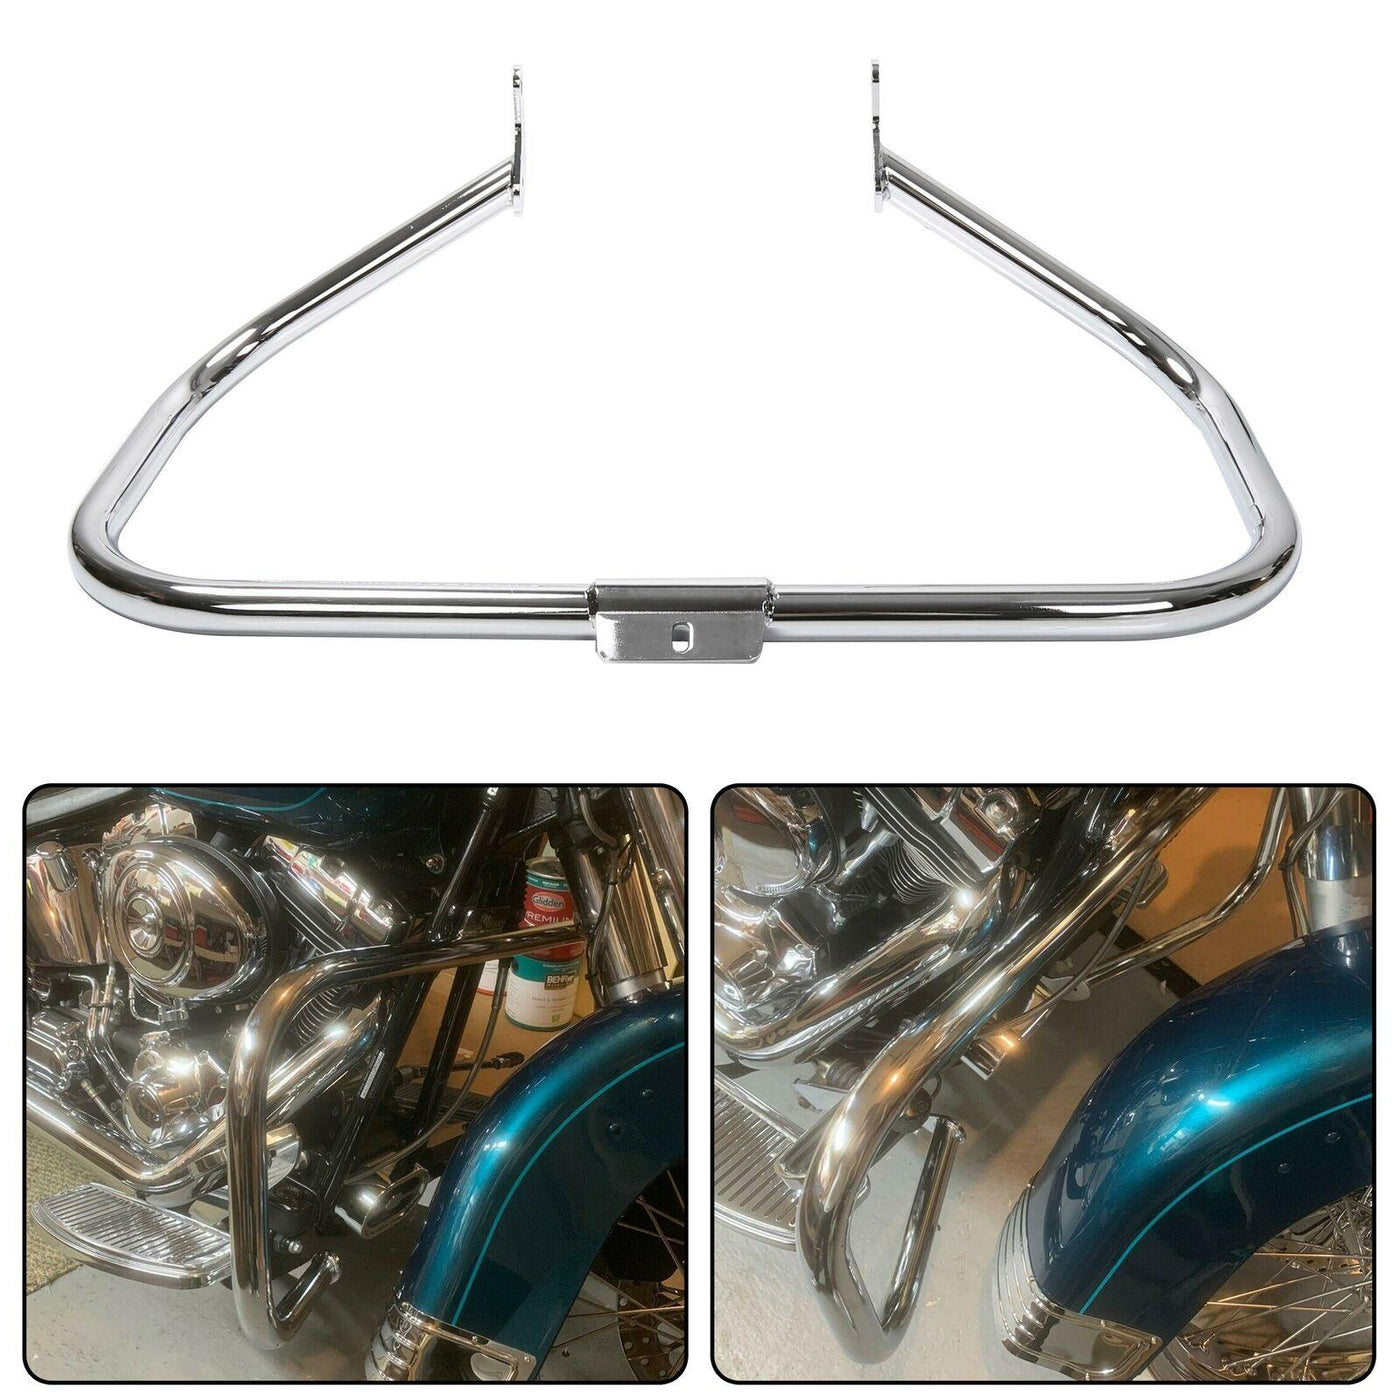 1 1/4" Engine Guard Highway Crash Bar For Harley 00-17 Softail Fatboy Heritage - Moto Life Products